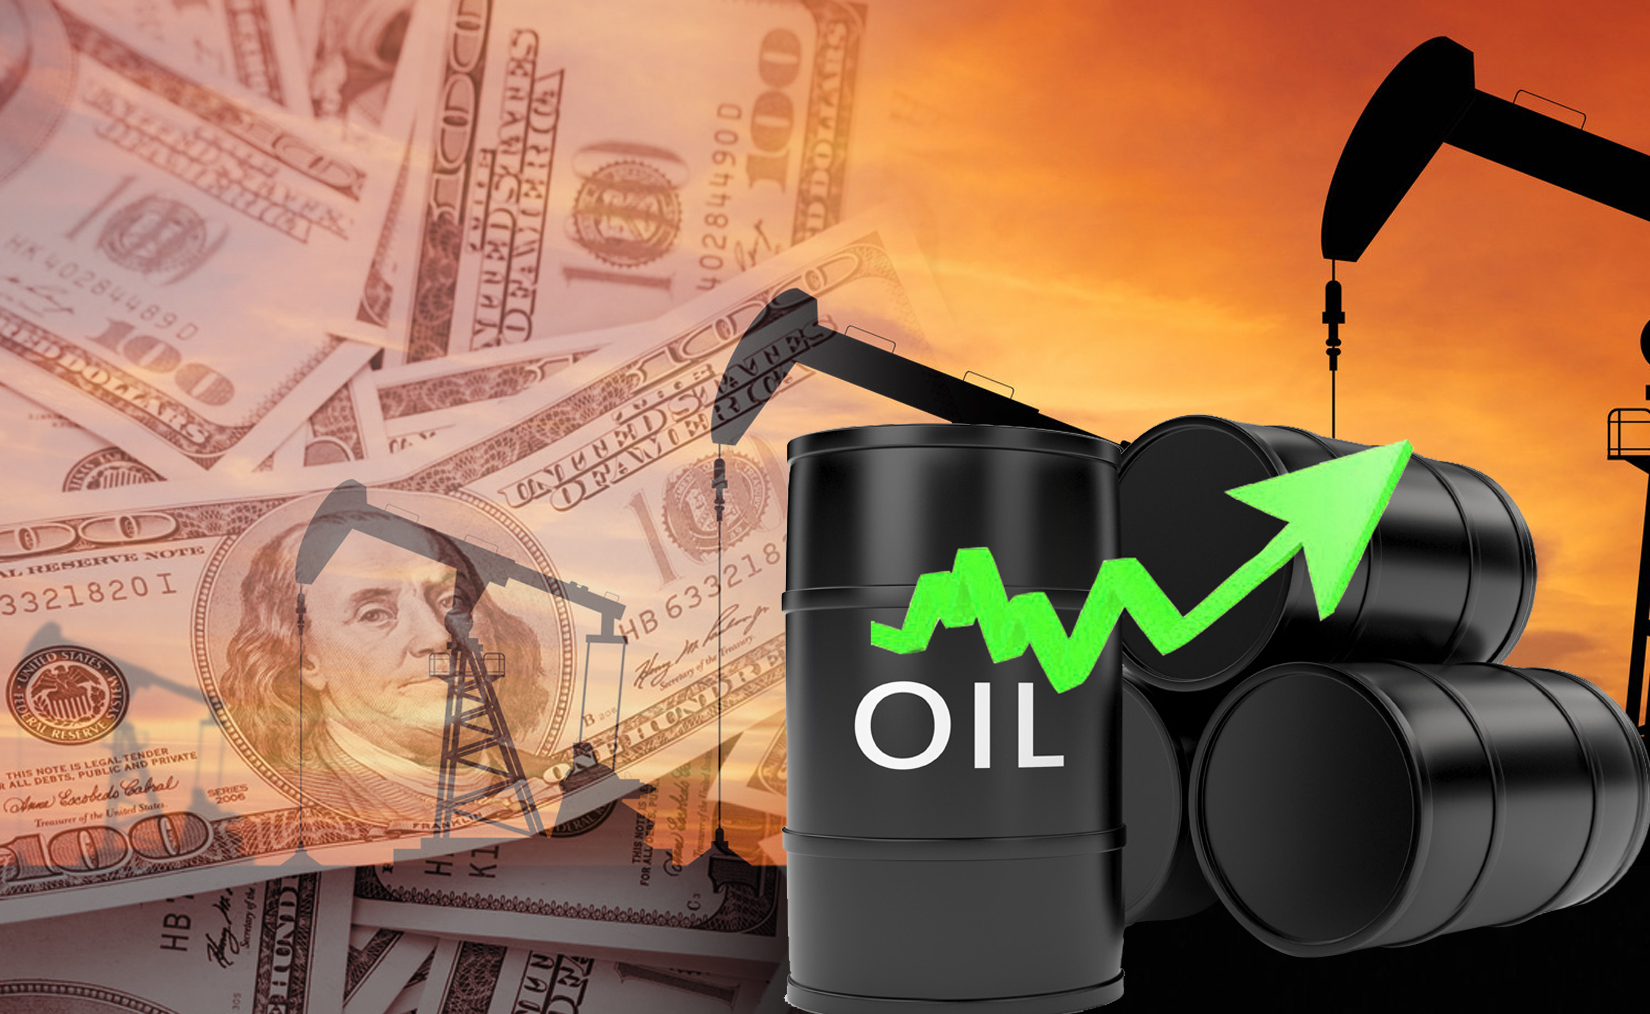 Kuwait oil price up 31 cents to USD 45.73 pb                                                                                                                                                                                                              